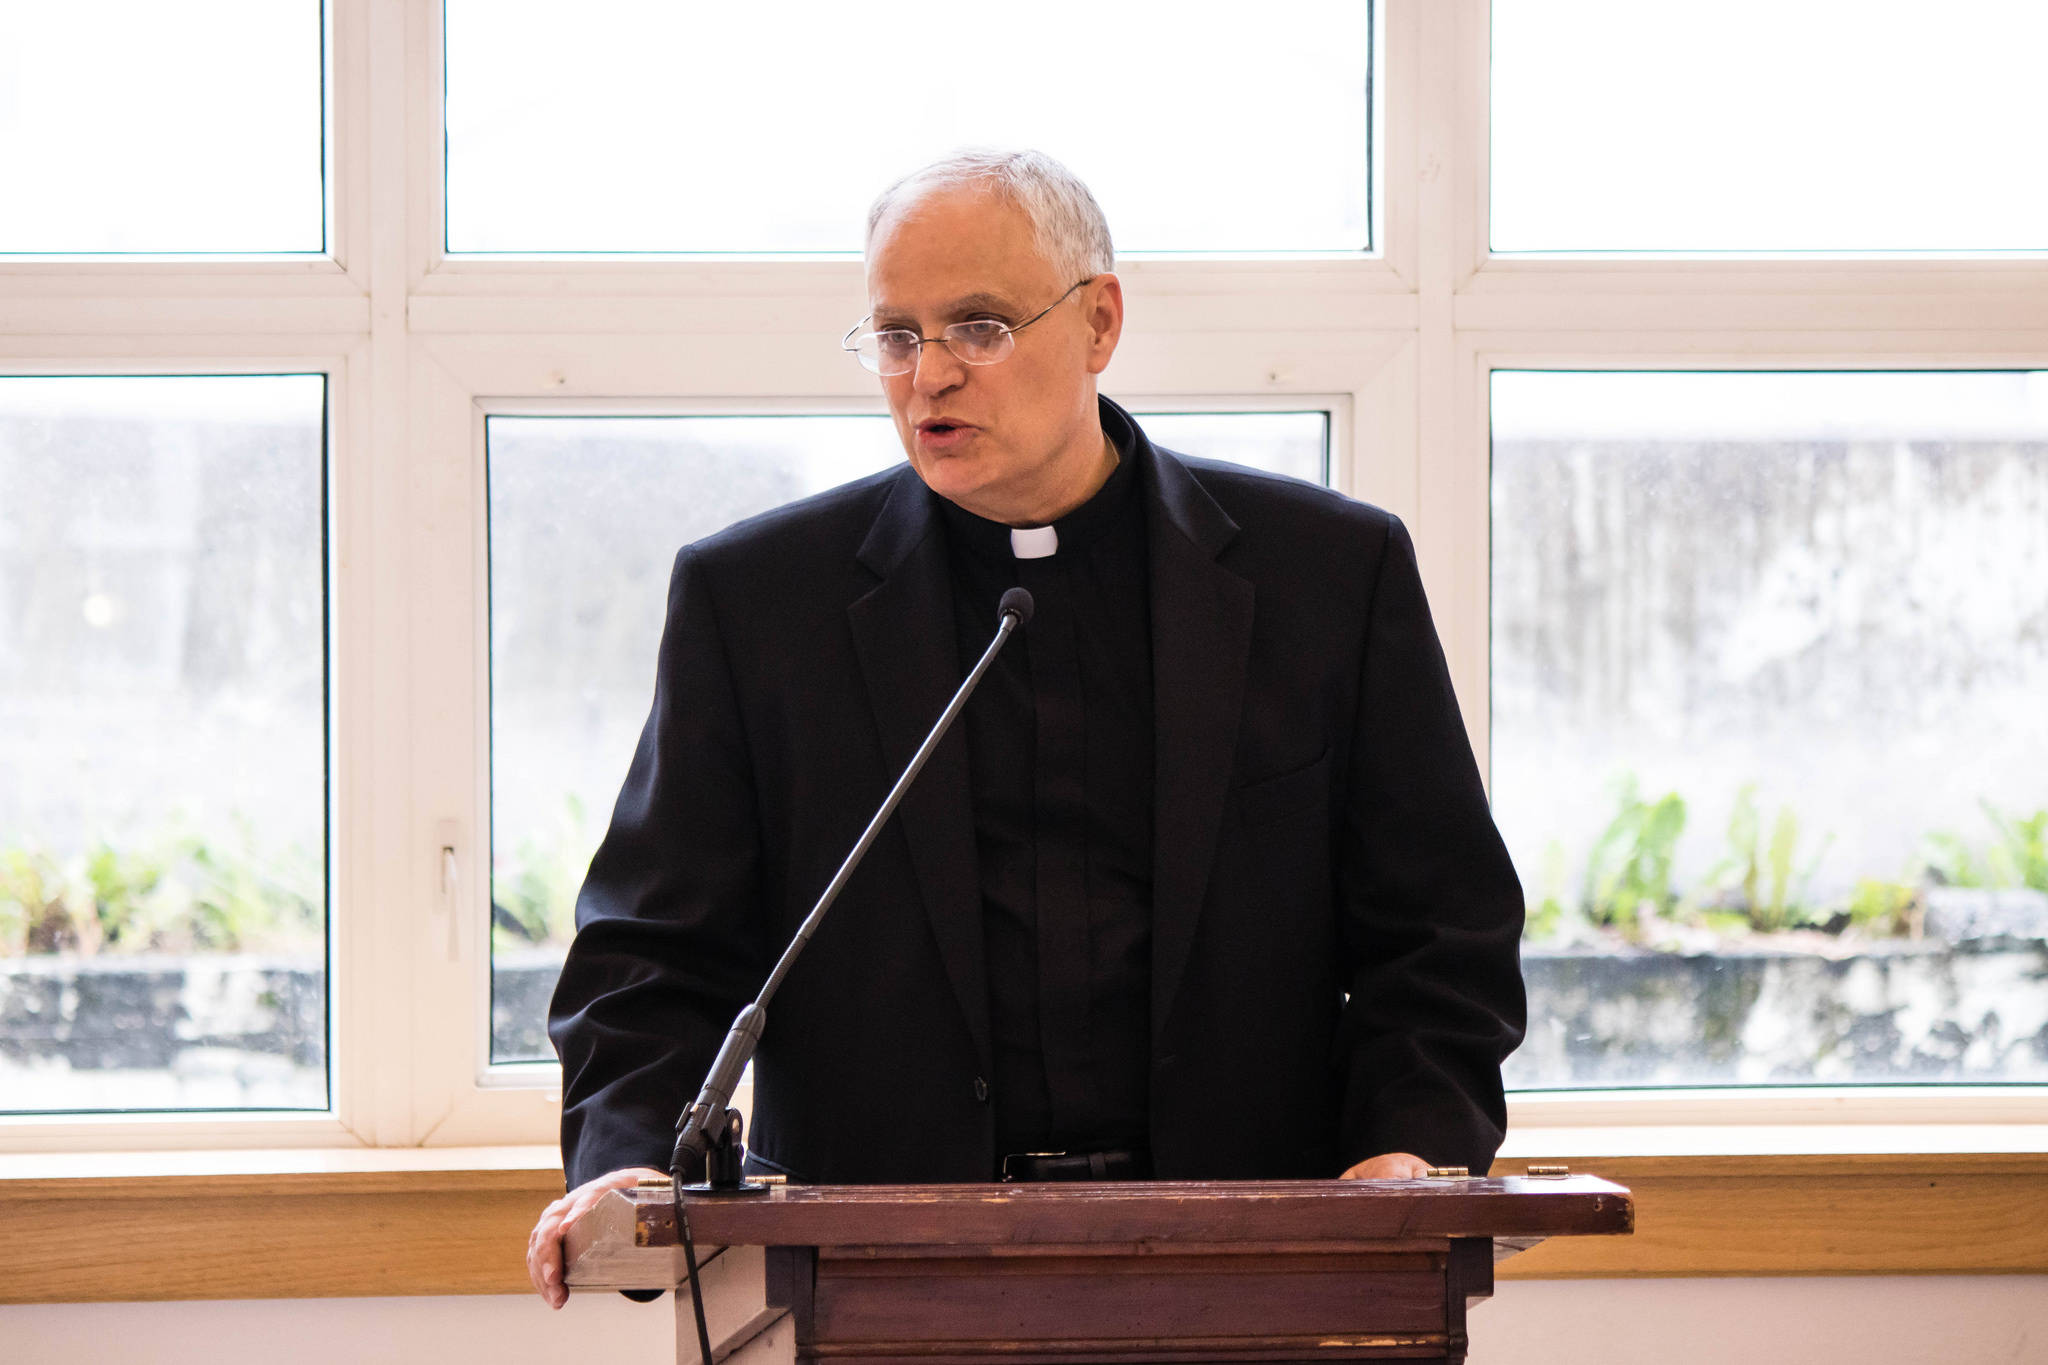 Bishop-elect Father Andrew Bellisario addresses parishioners and media members at a Tuesday press conference. Bellisario has been appointed the next bishop of the Diocese of Juneau, and starts in October. (Photo courtesy of Christine Johnson)